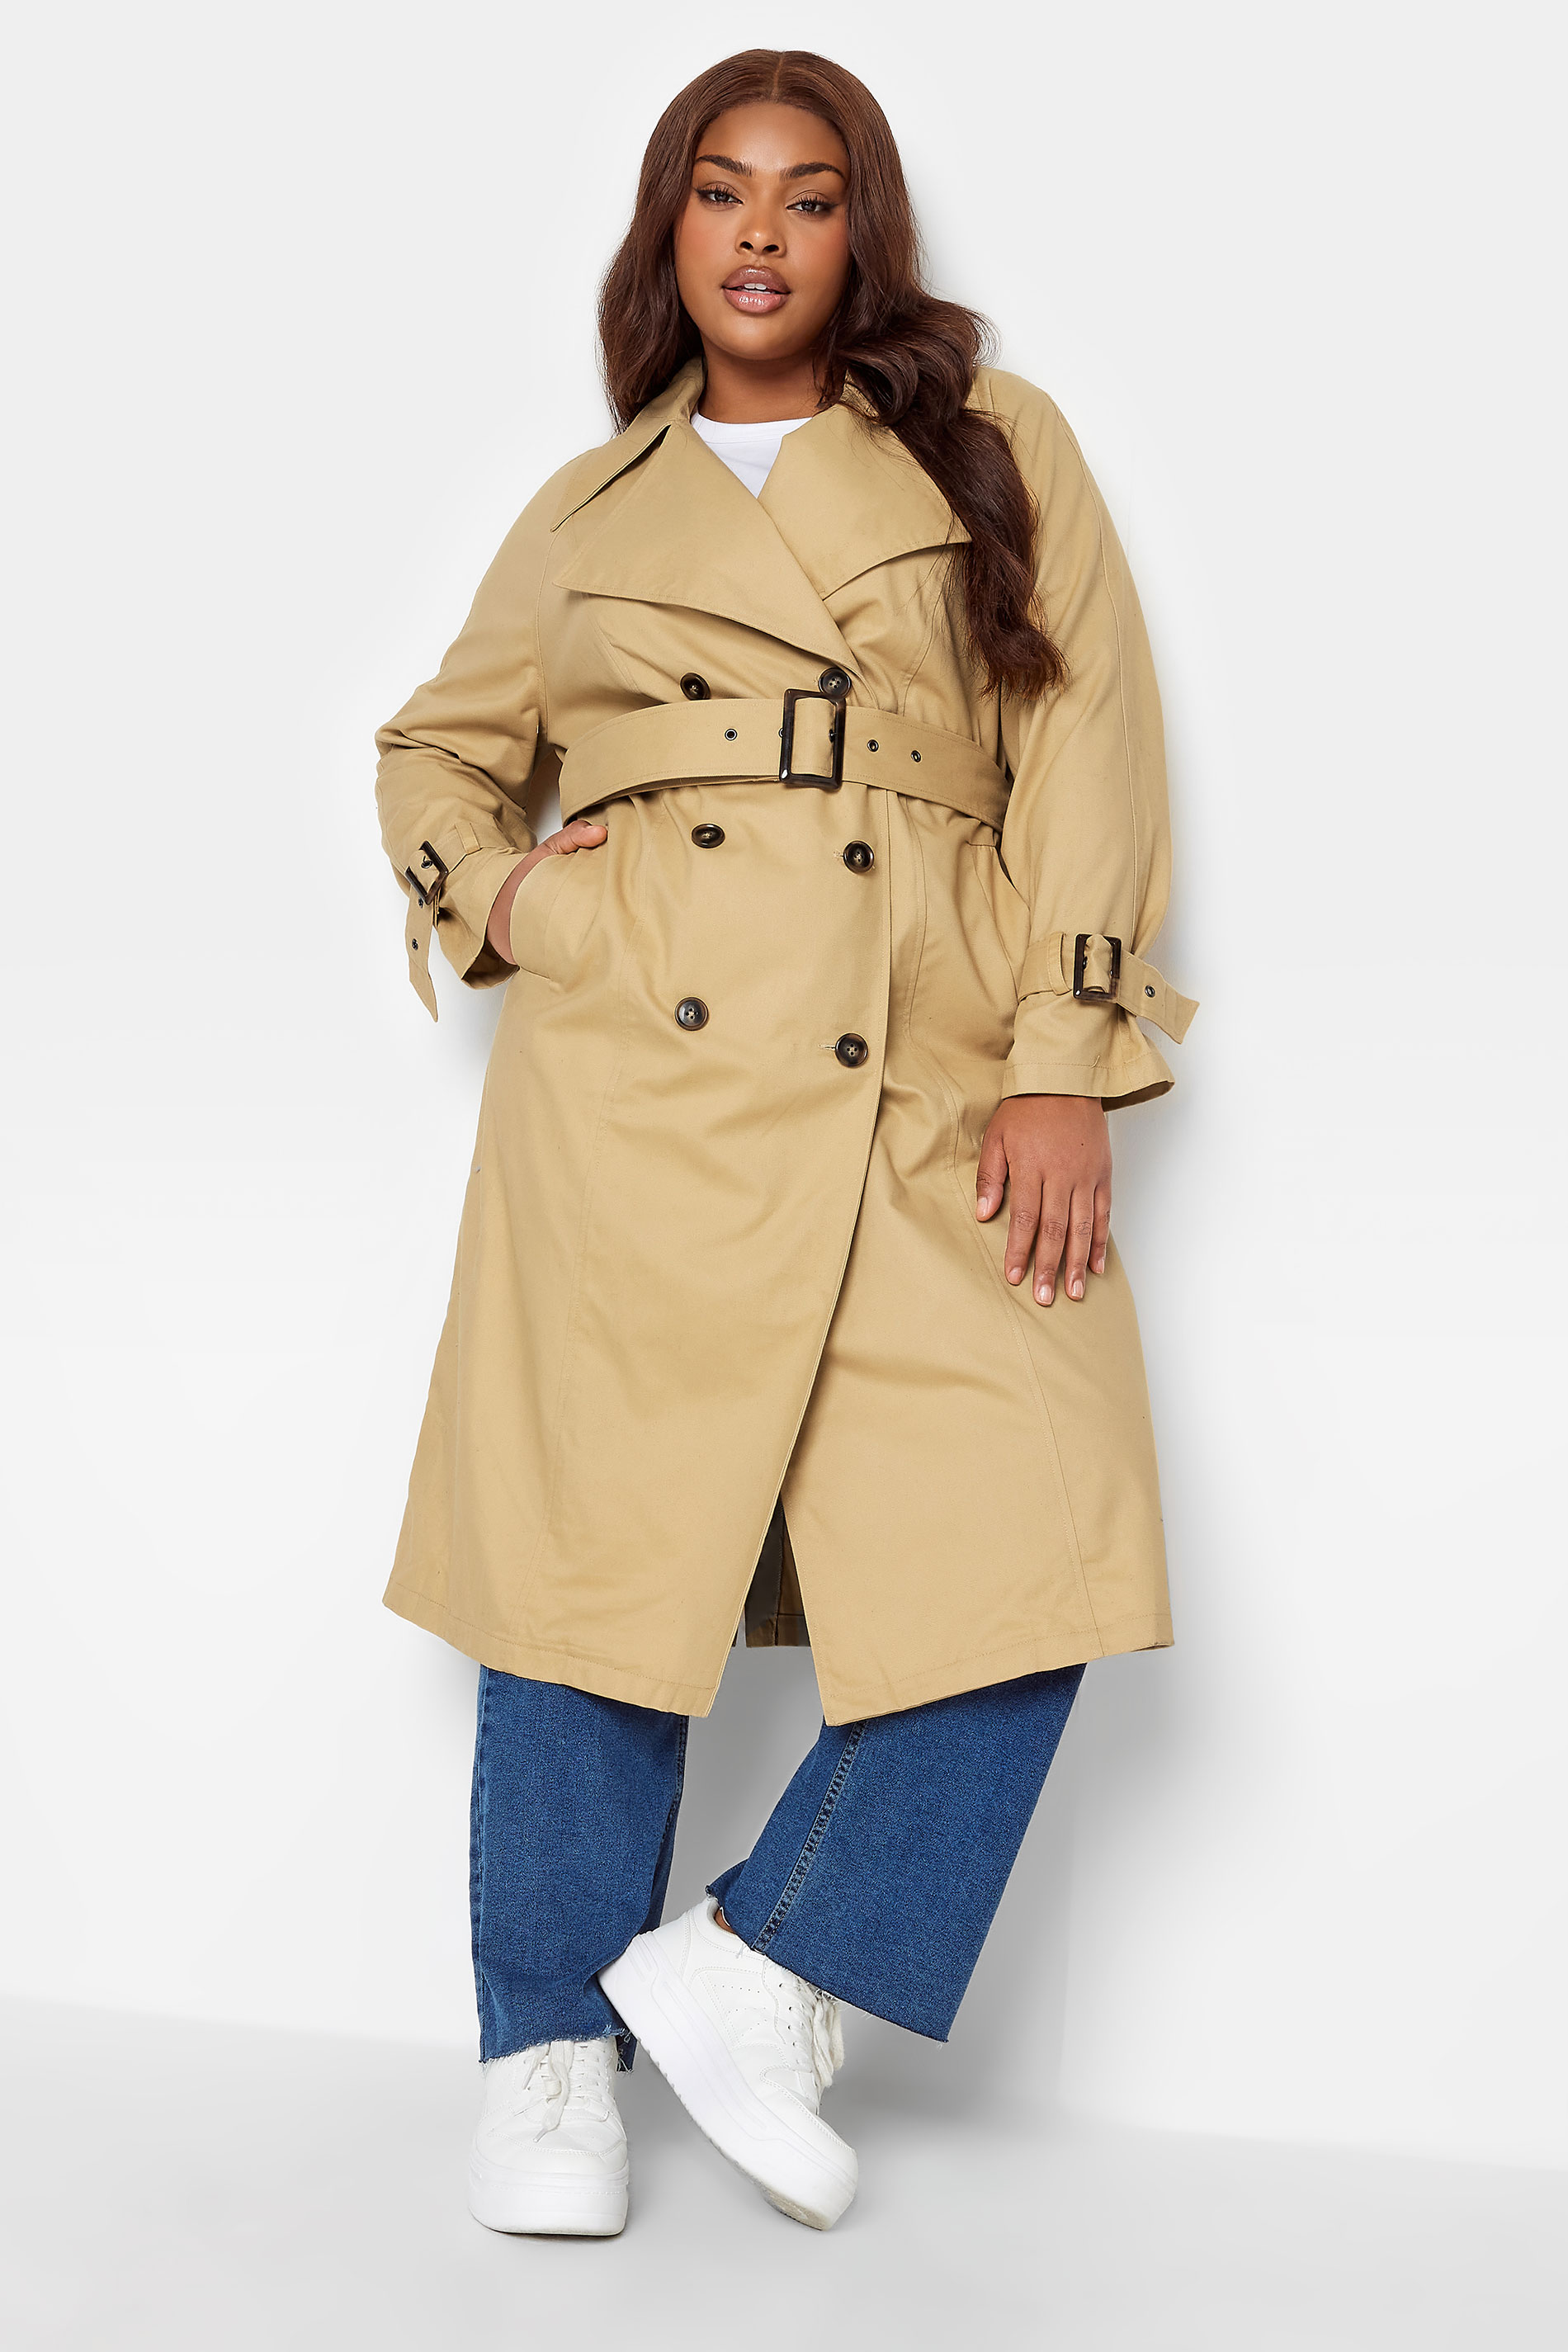 Yours Curve Beige Brown Trench Coat, Women's Curve & Plus Size, Yours product